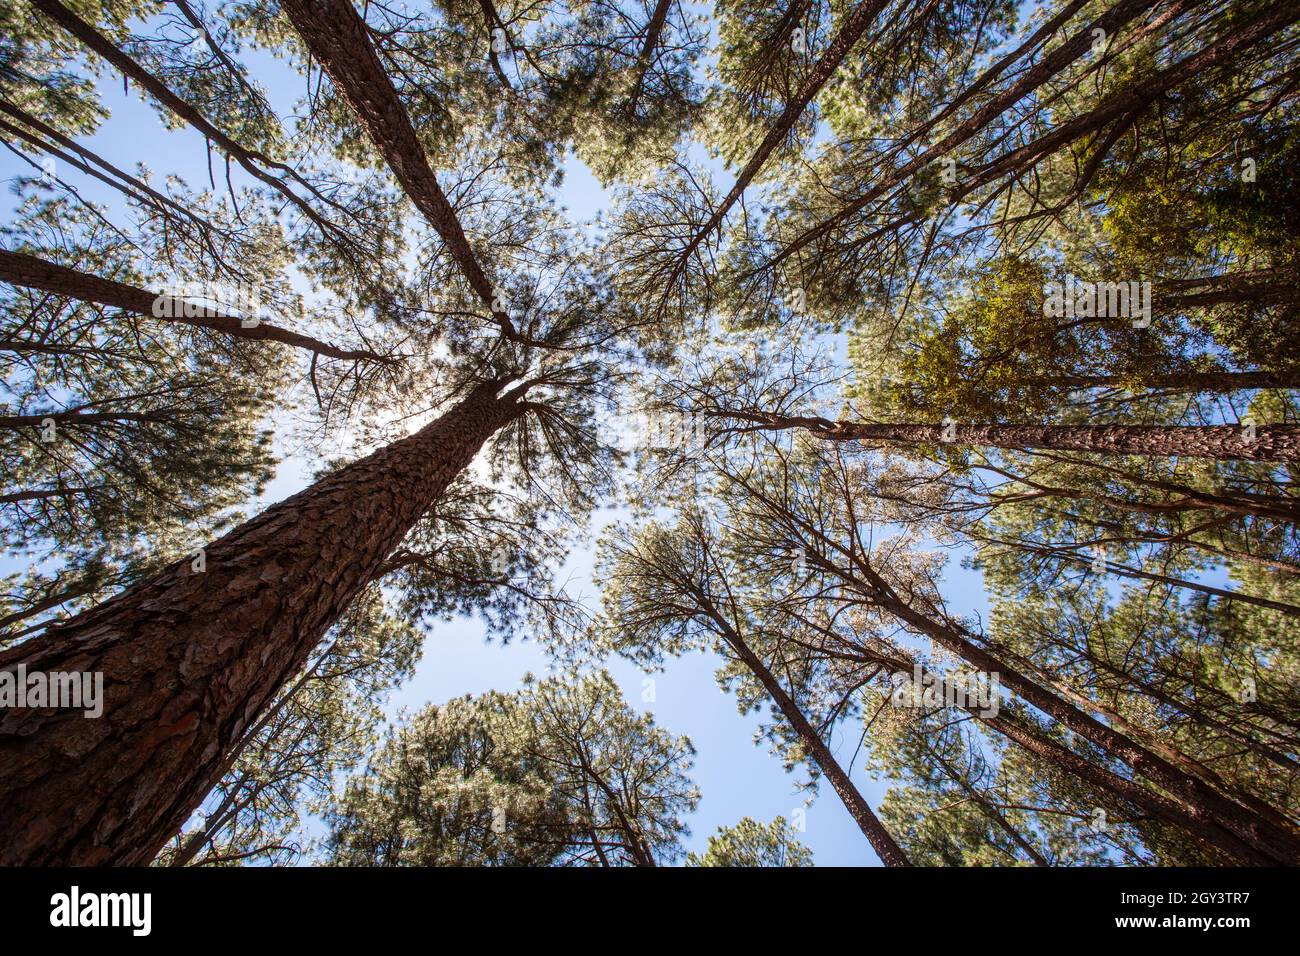 very tall gum trees in Australia looking up Stock Photo